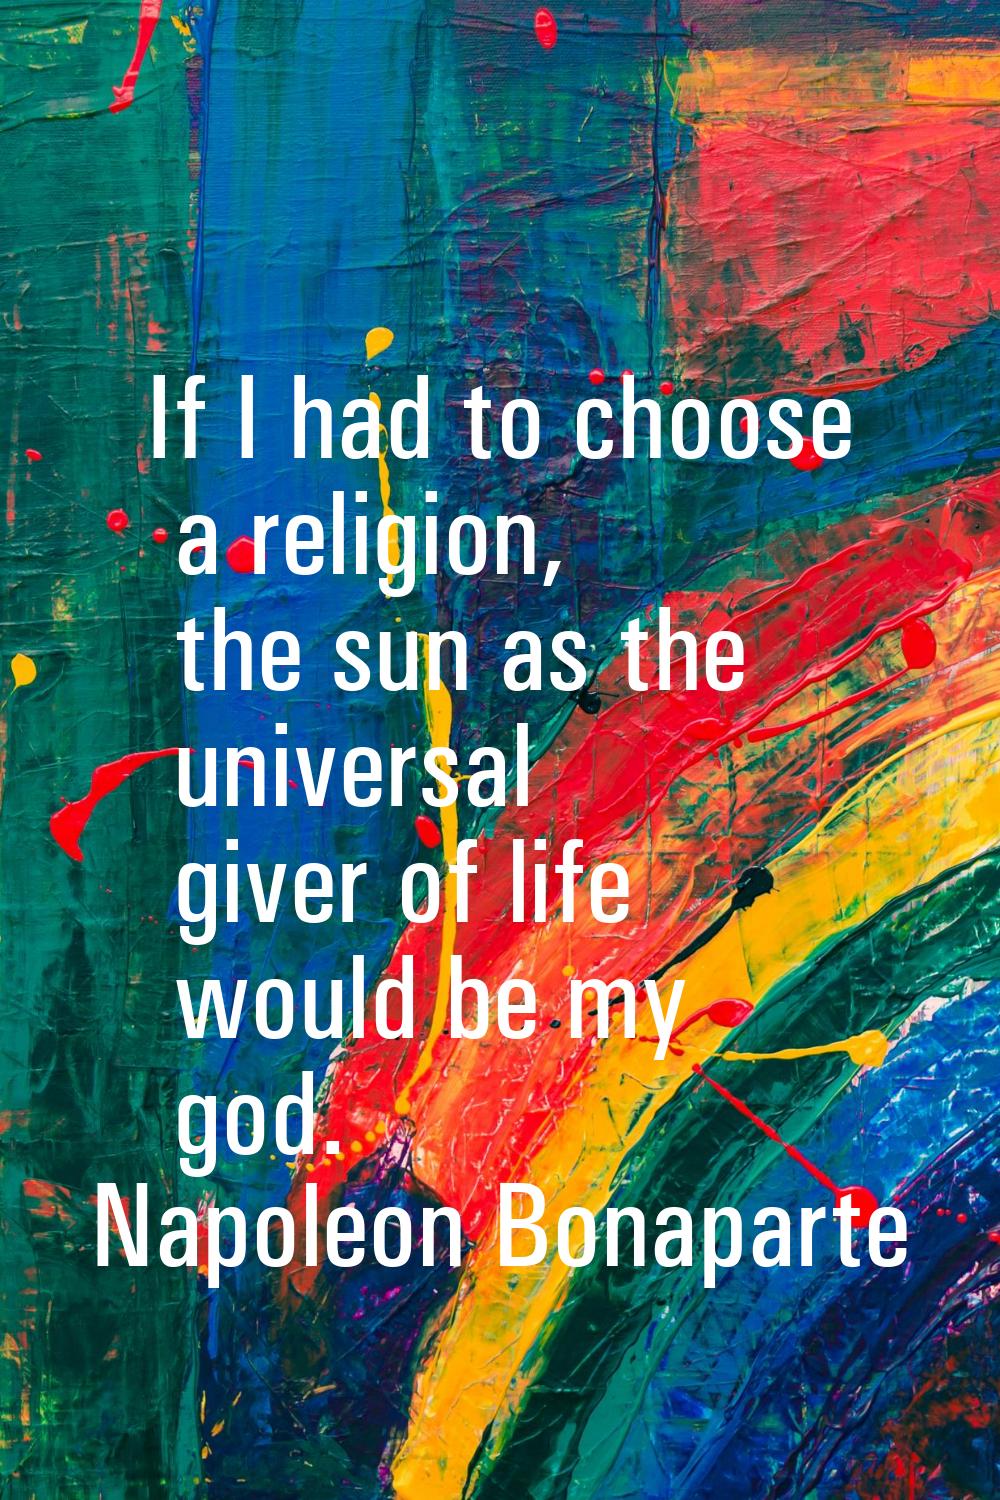 If I had to choose a religion, the sun as the universal giver of life would be my god.